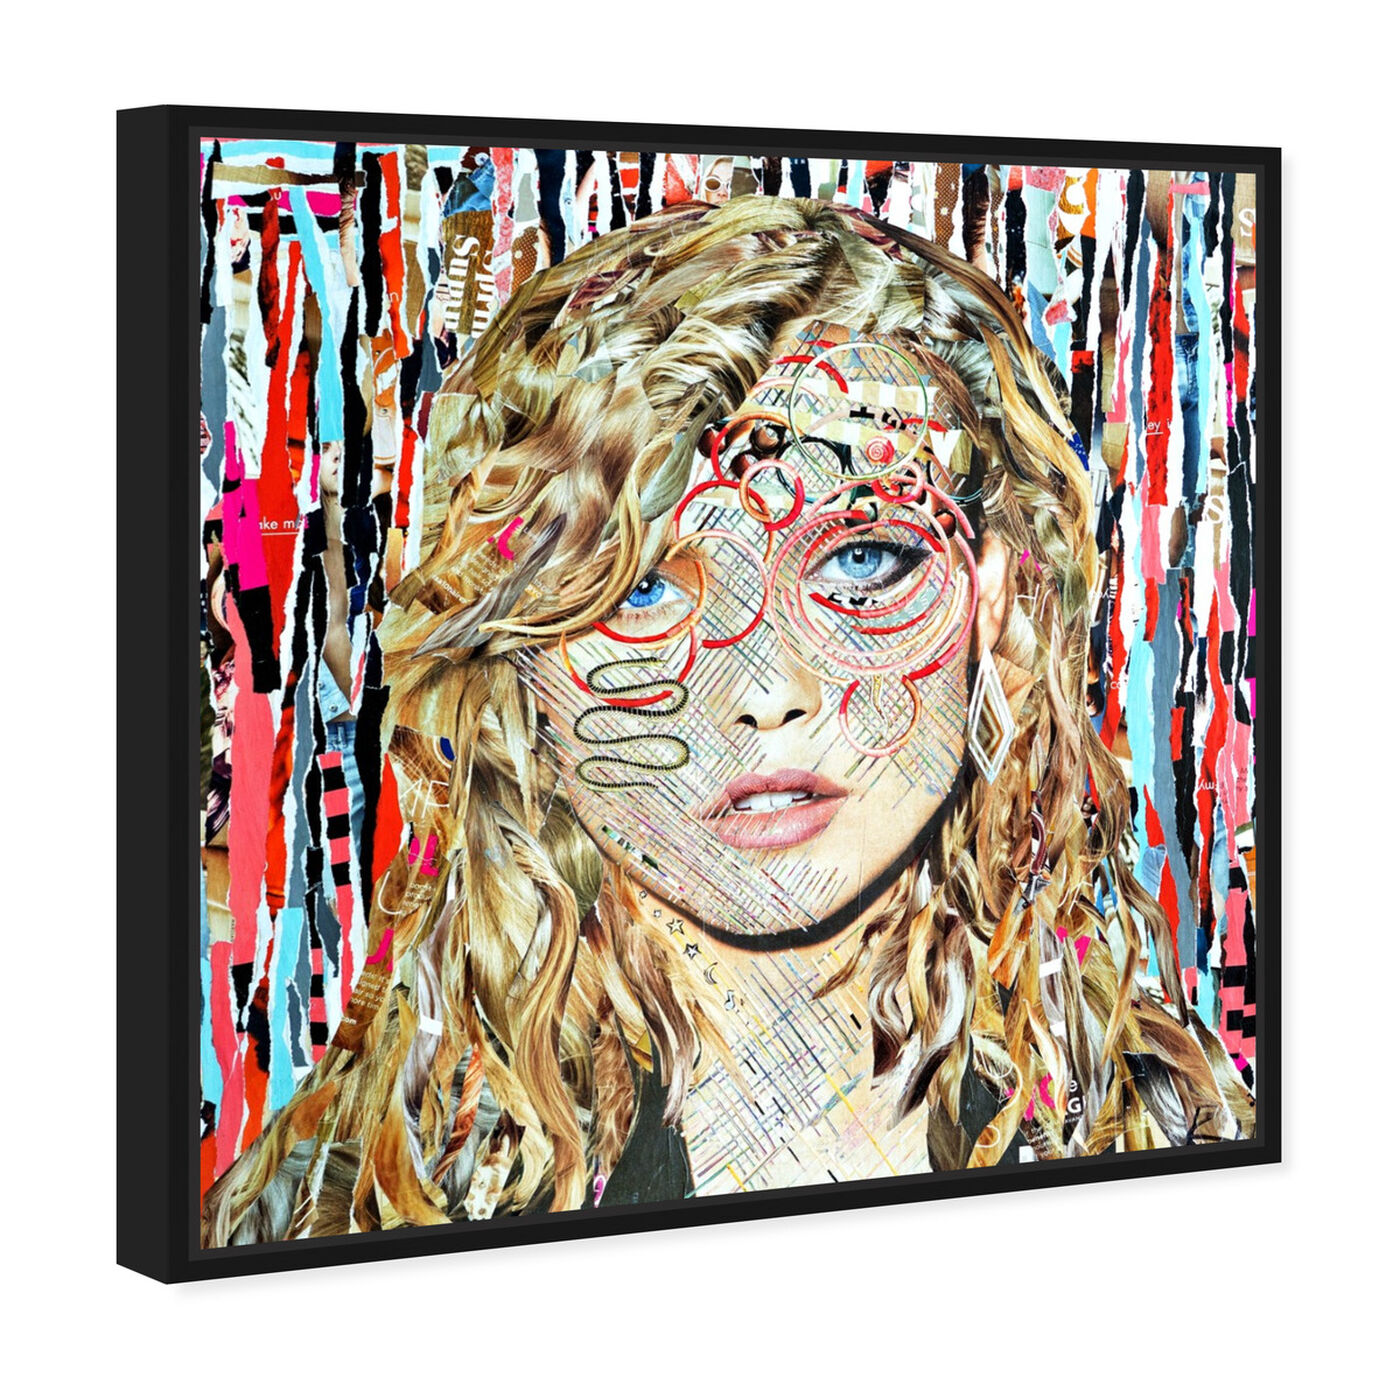 Angled view of Blondie by Katy Hirschfeld featuring fashion and glam and portraits art.